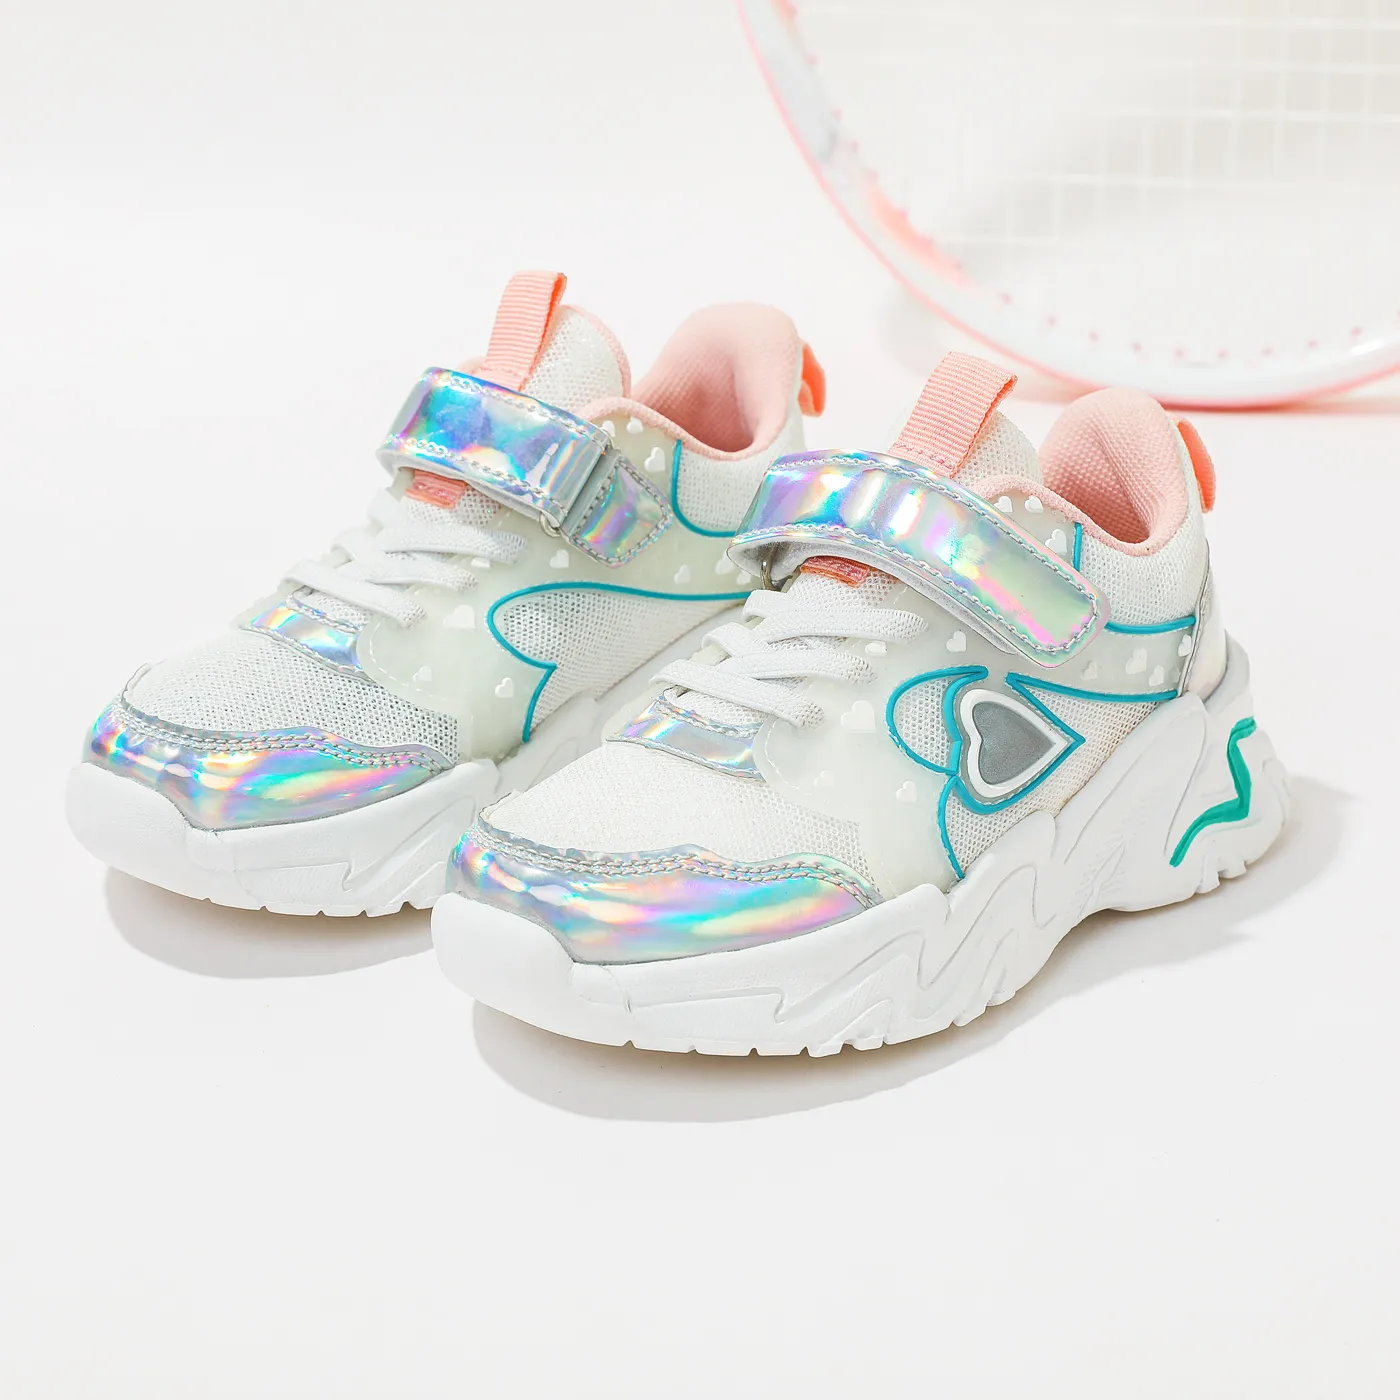 Lace-up Front Holographic Chunky Sneakers | Chunky sneakers, Sneakers,  Womens sneakers